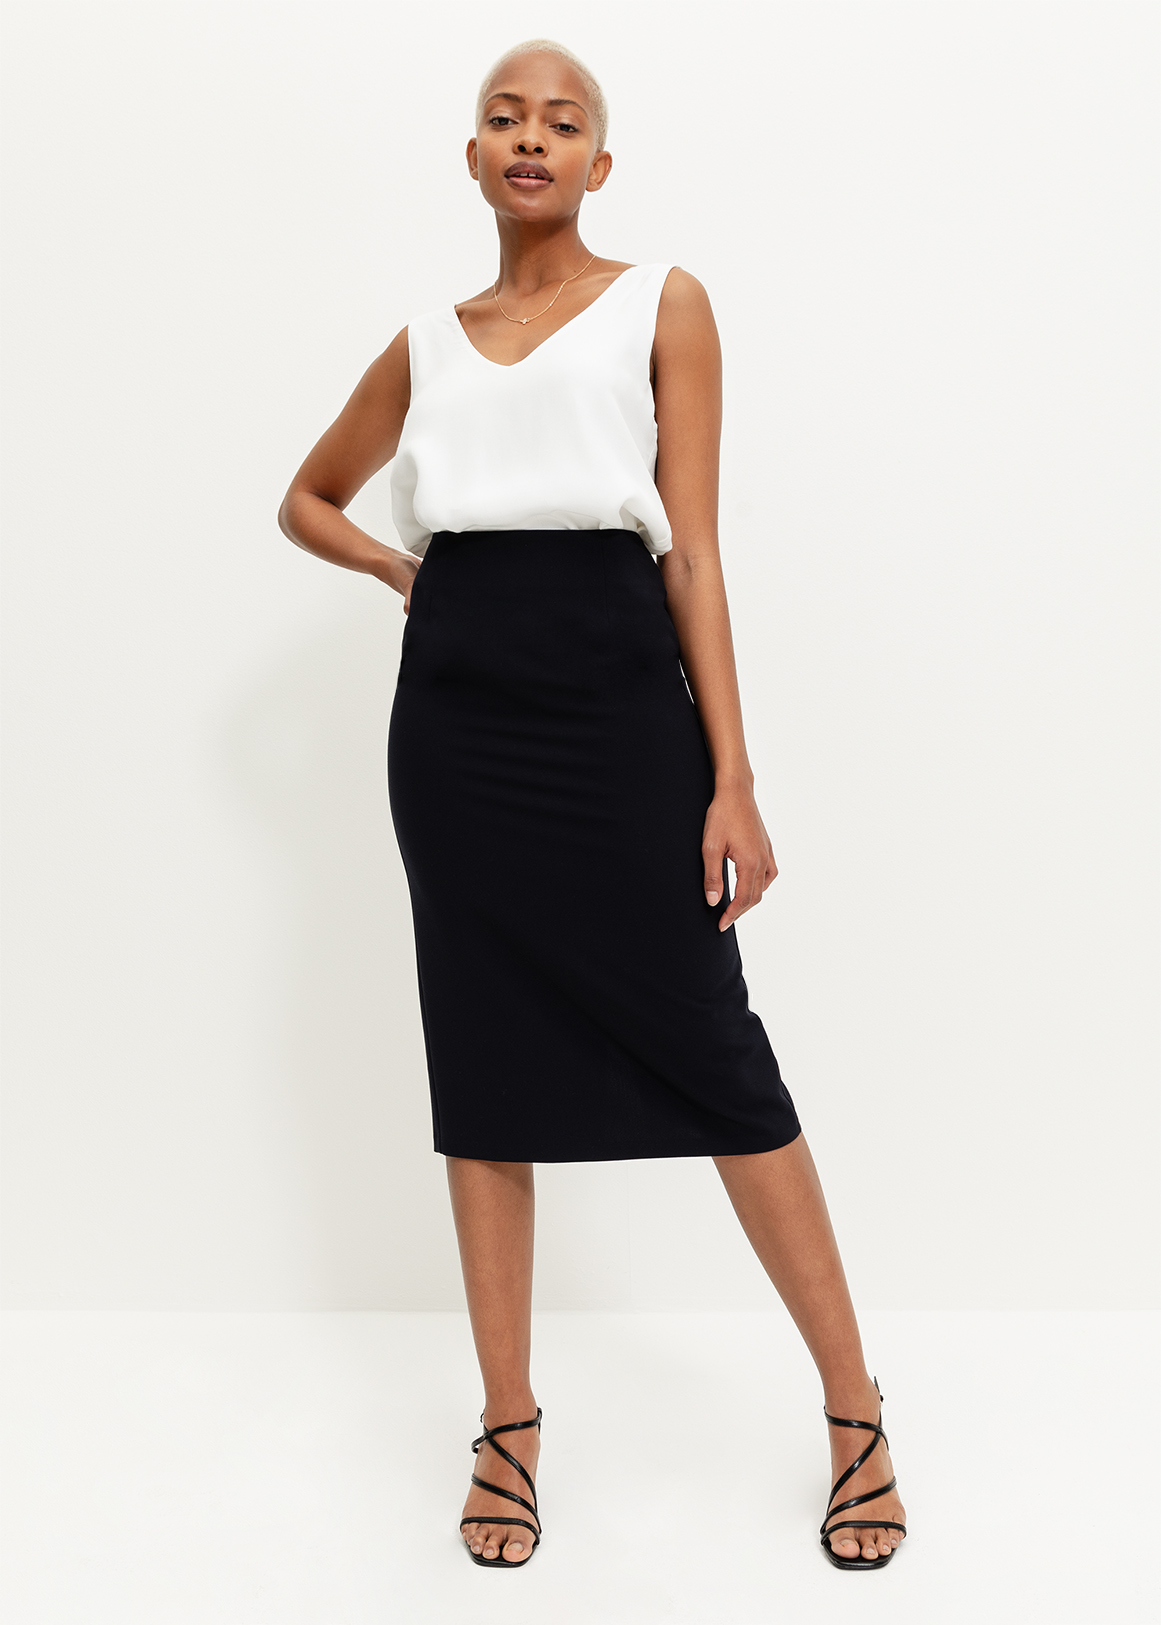 Most Trending And Demanding High waist Pencil Skirts To Wear In Office 